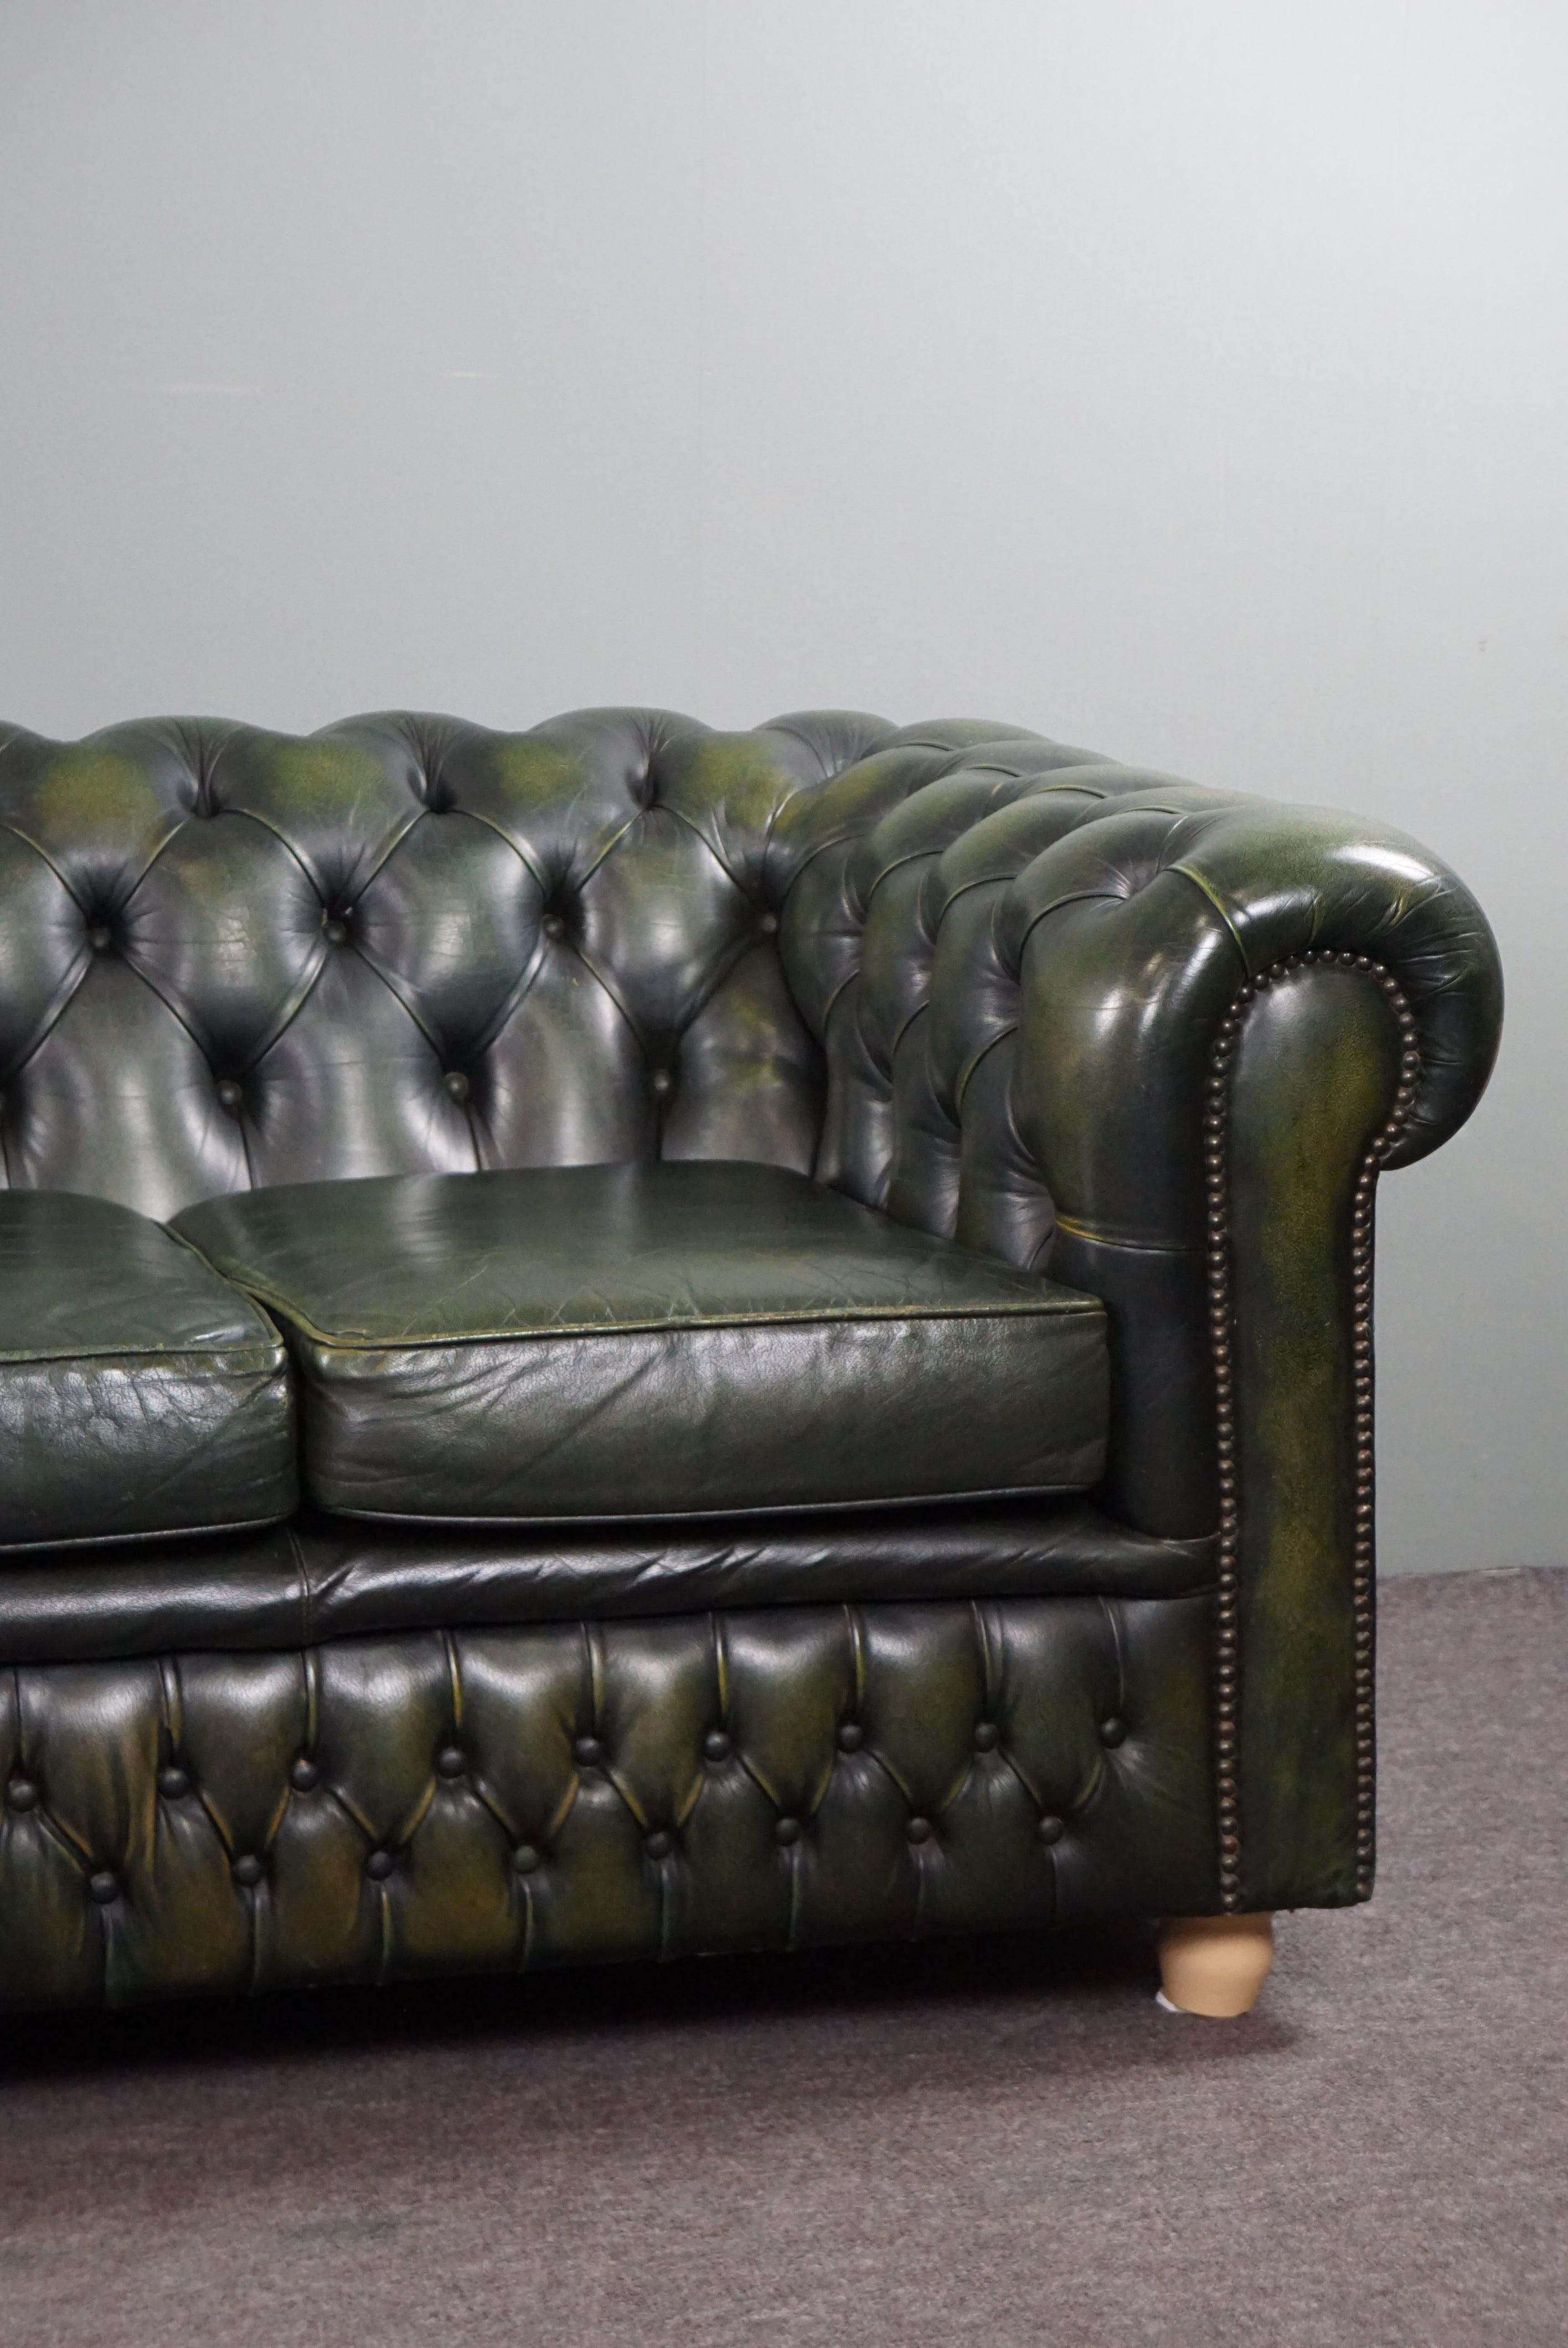 Beautifully colored spacious green cow leather Chesterfield sofa, 3.5 seater 2